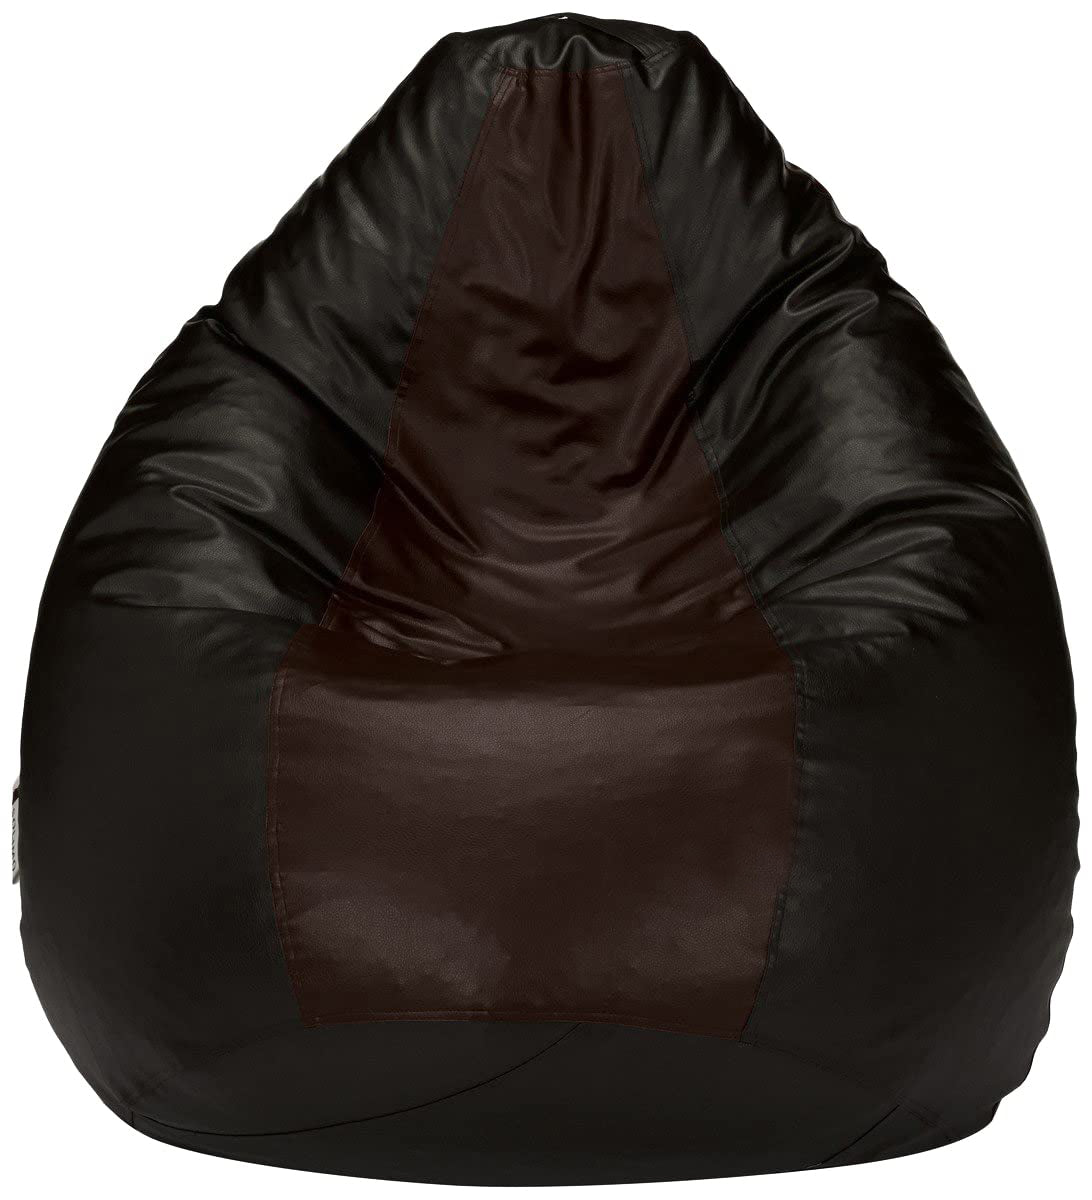 HDC Super Lama Leather Bean Bag Cover Without Beans (Black & Brown) - HDC.IN